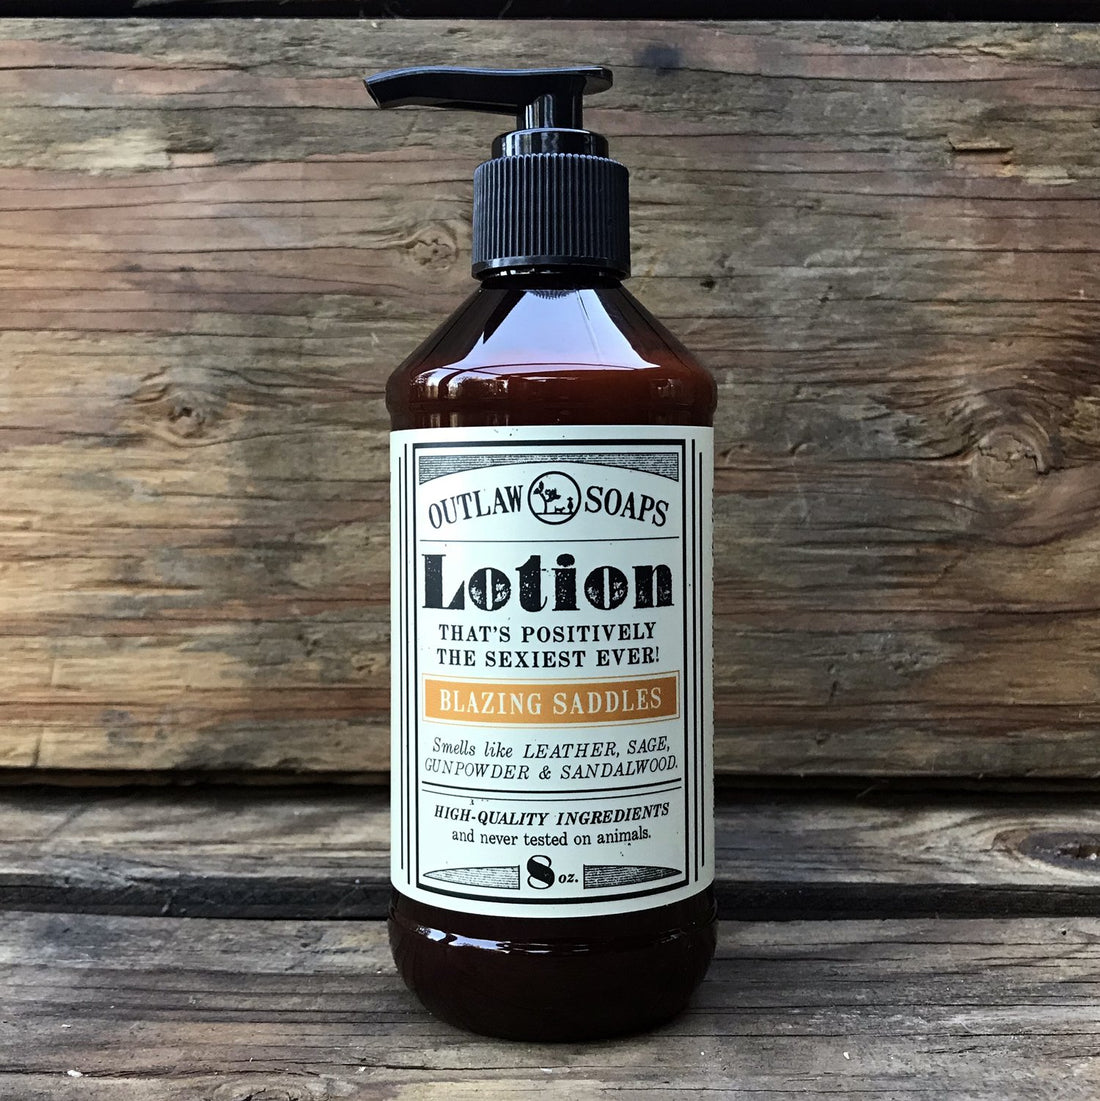 The Lotion Adventure: A product 5 years in the making